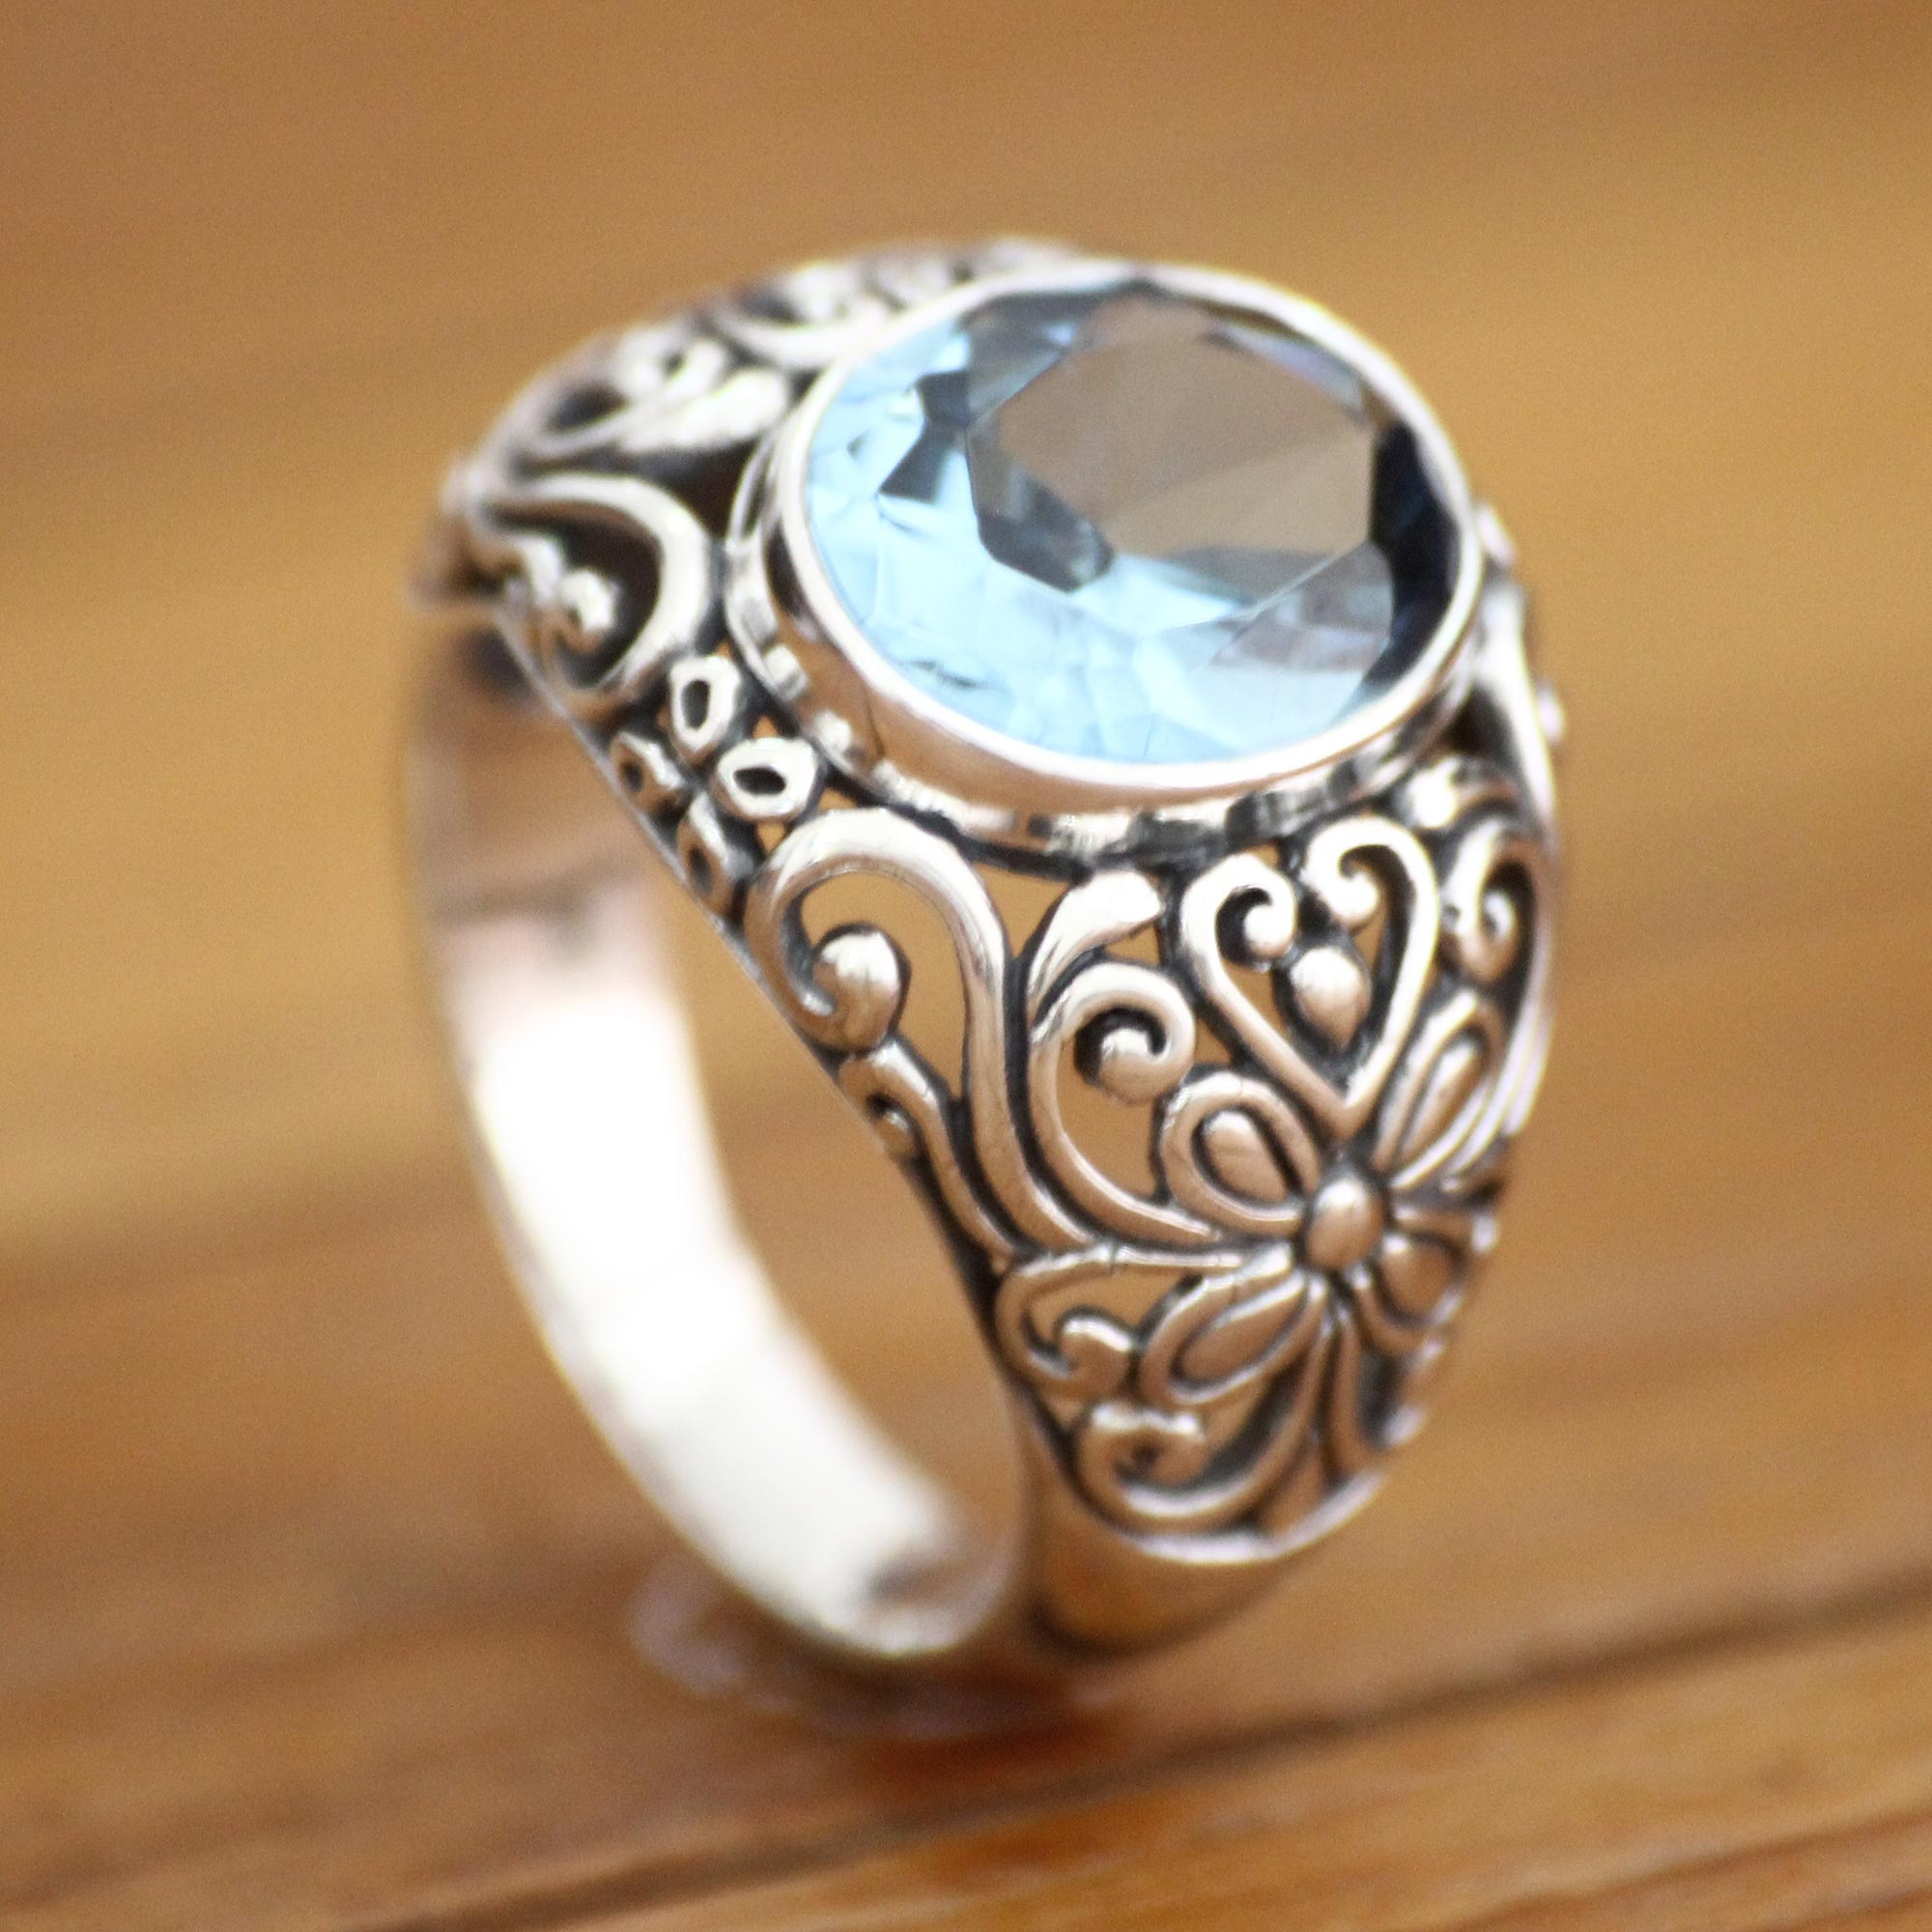 Handmade Sterling Silver and Blue Topaz Cocktail Ring - Mythical